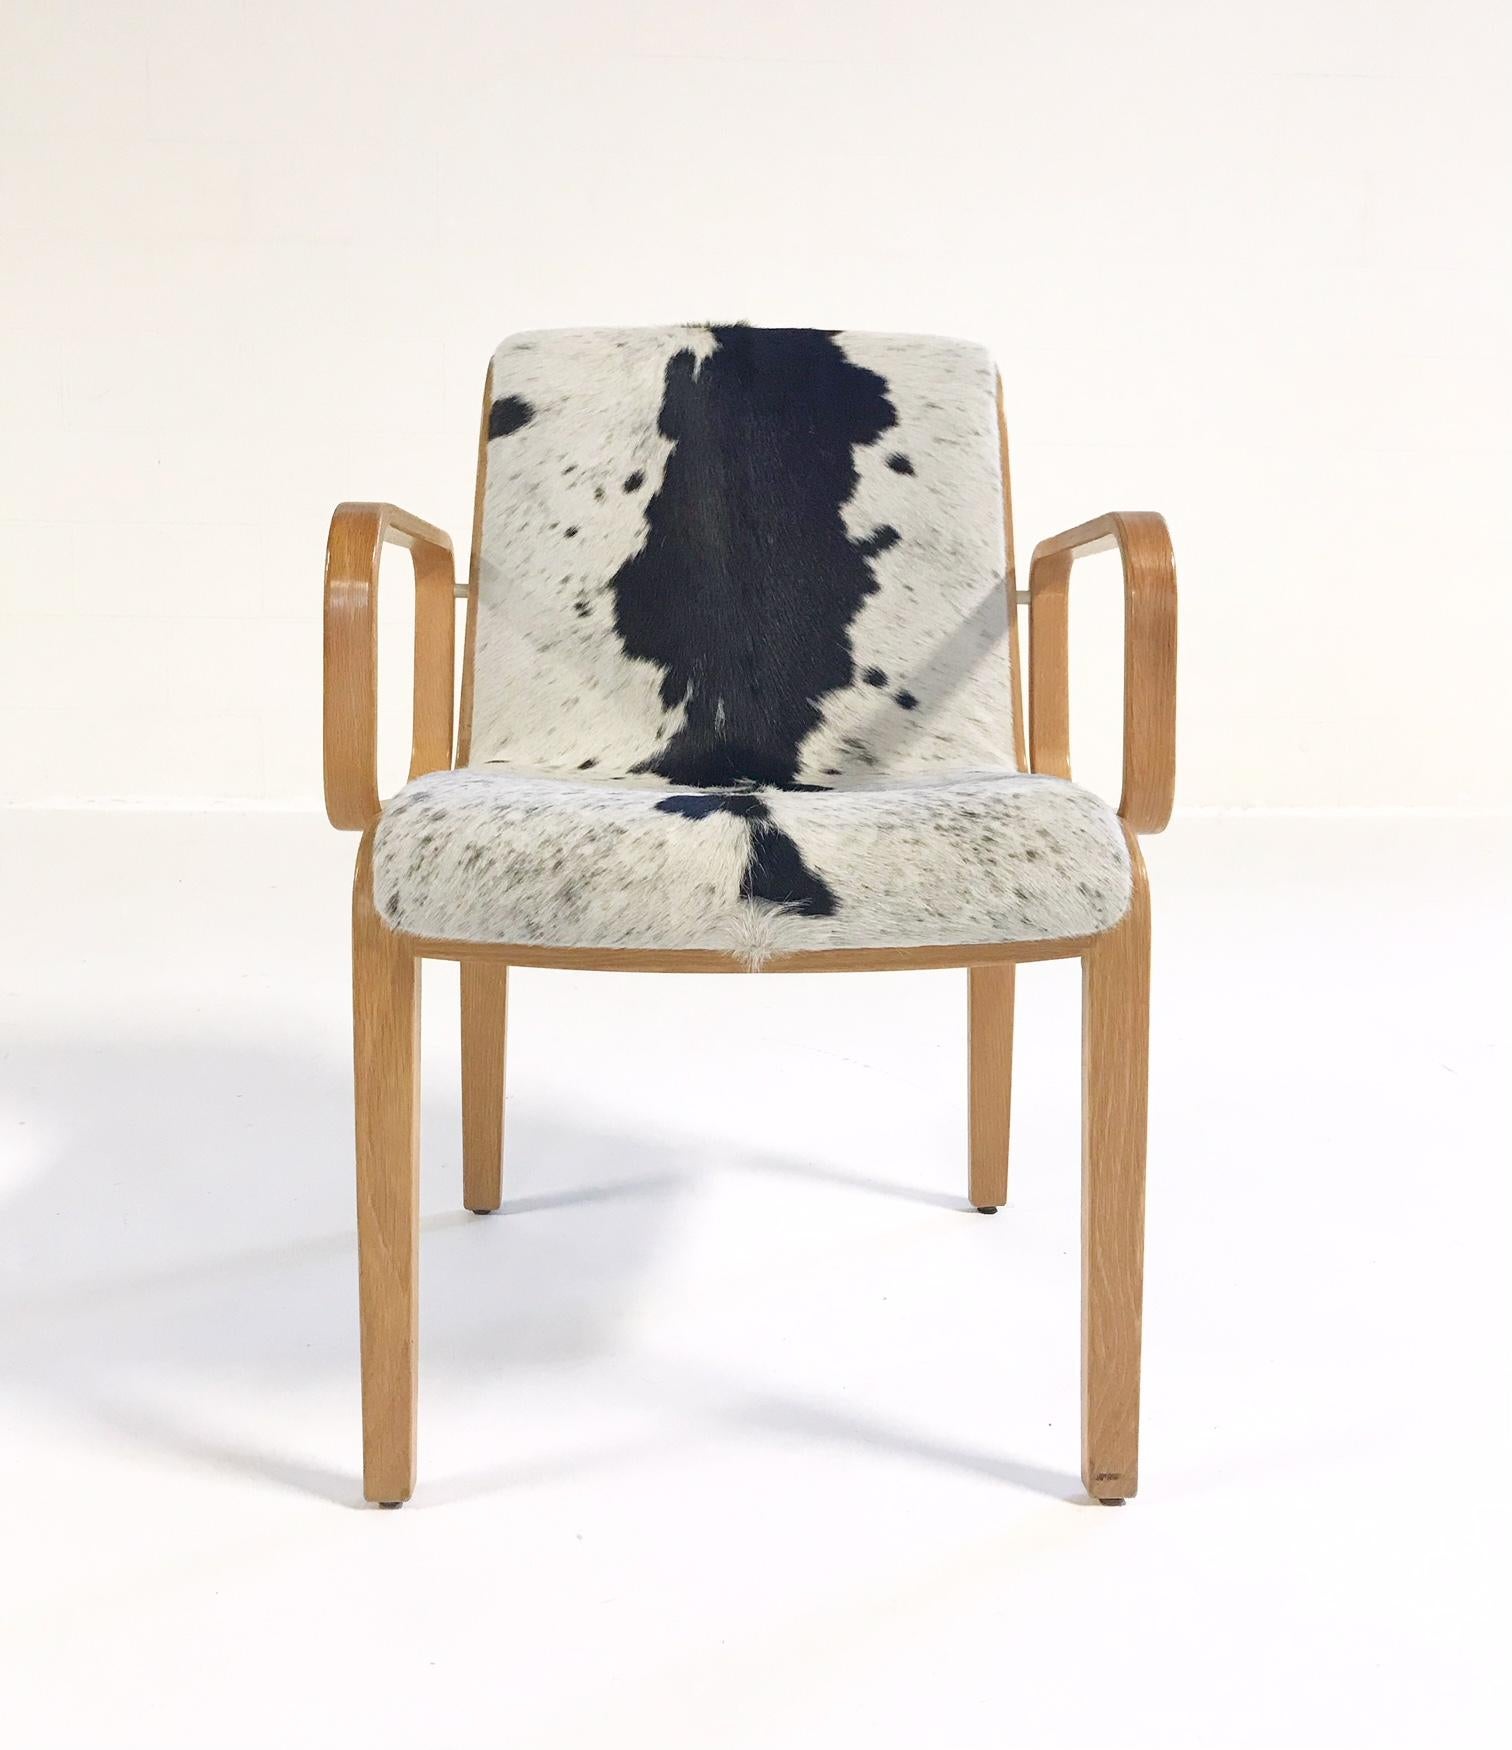 We saw this cowhide in our stash and immediately thought of this chair to reupholster. The splashy center is perfect for the small footprint. Perfect for a desk chair.
 
Measures: 22.5